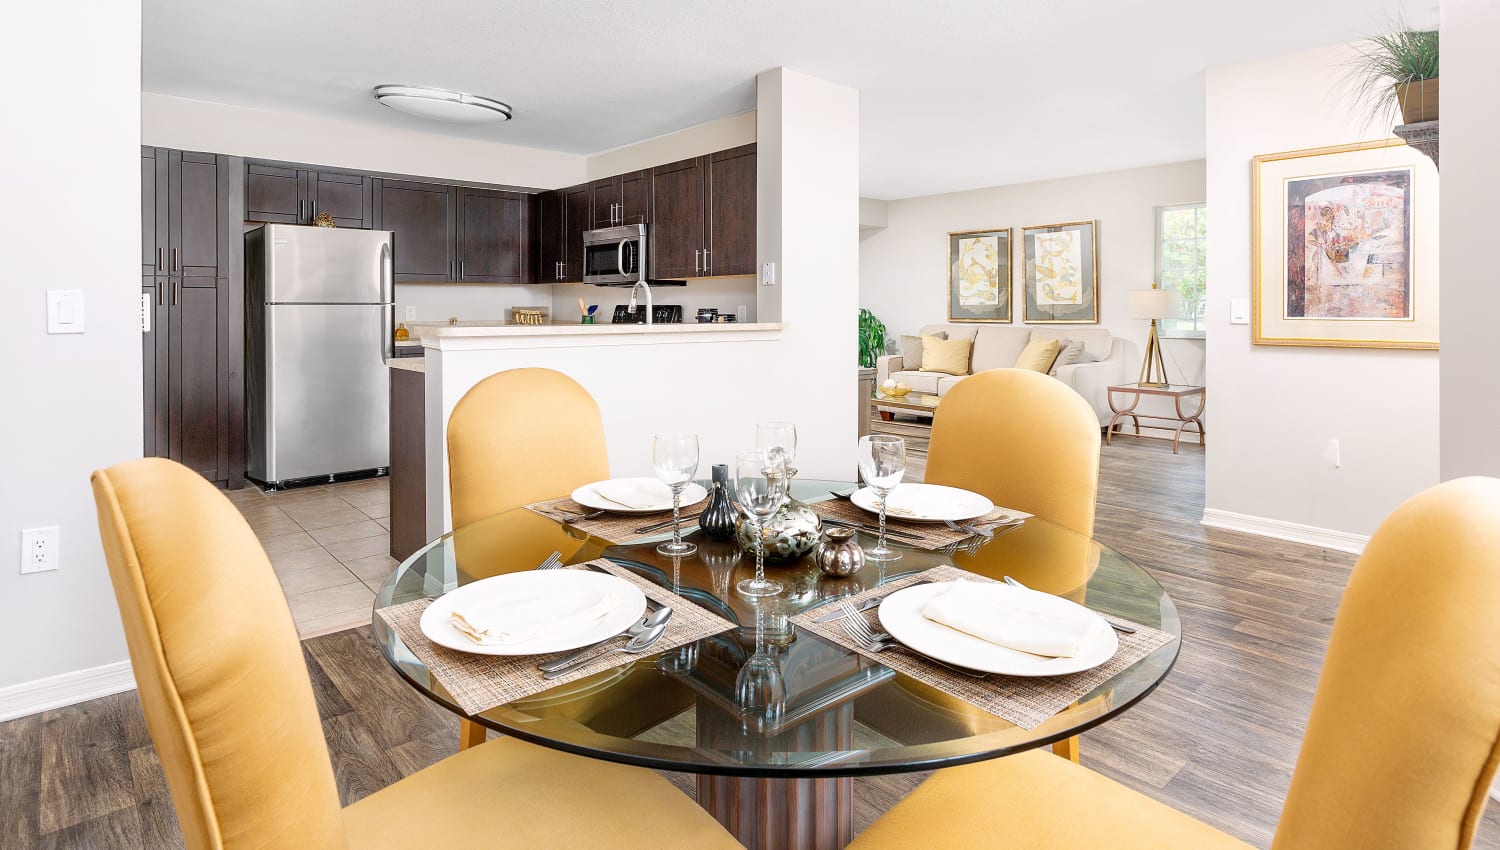 Dining table and kitchen at Weston Place Apartments in Weston, Florida